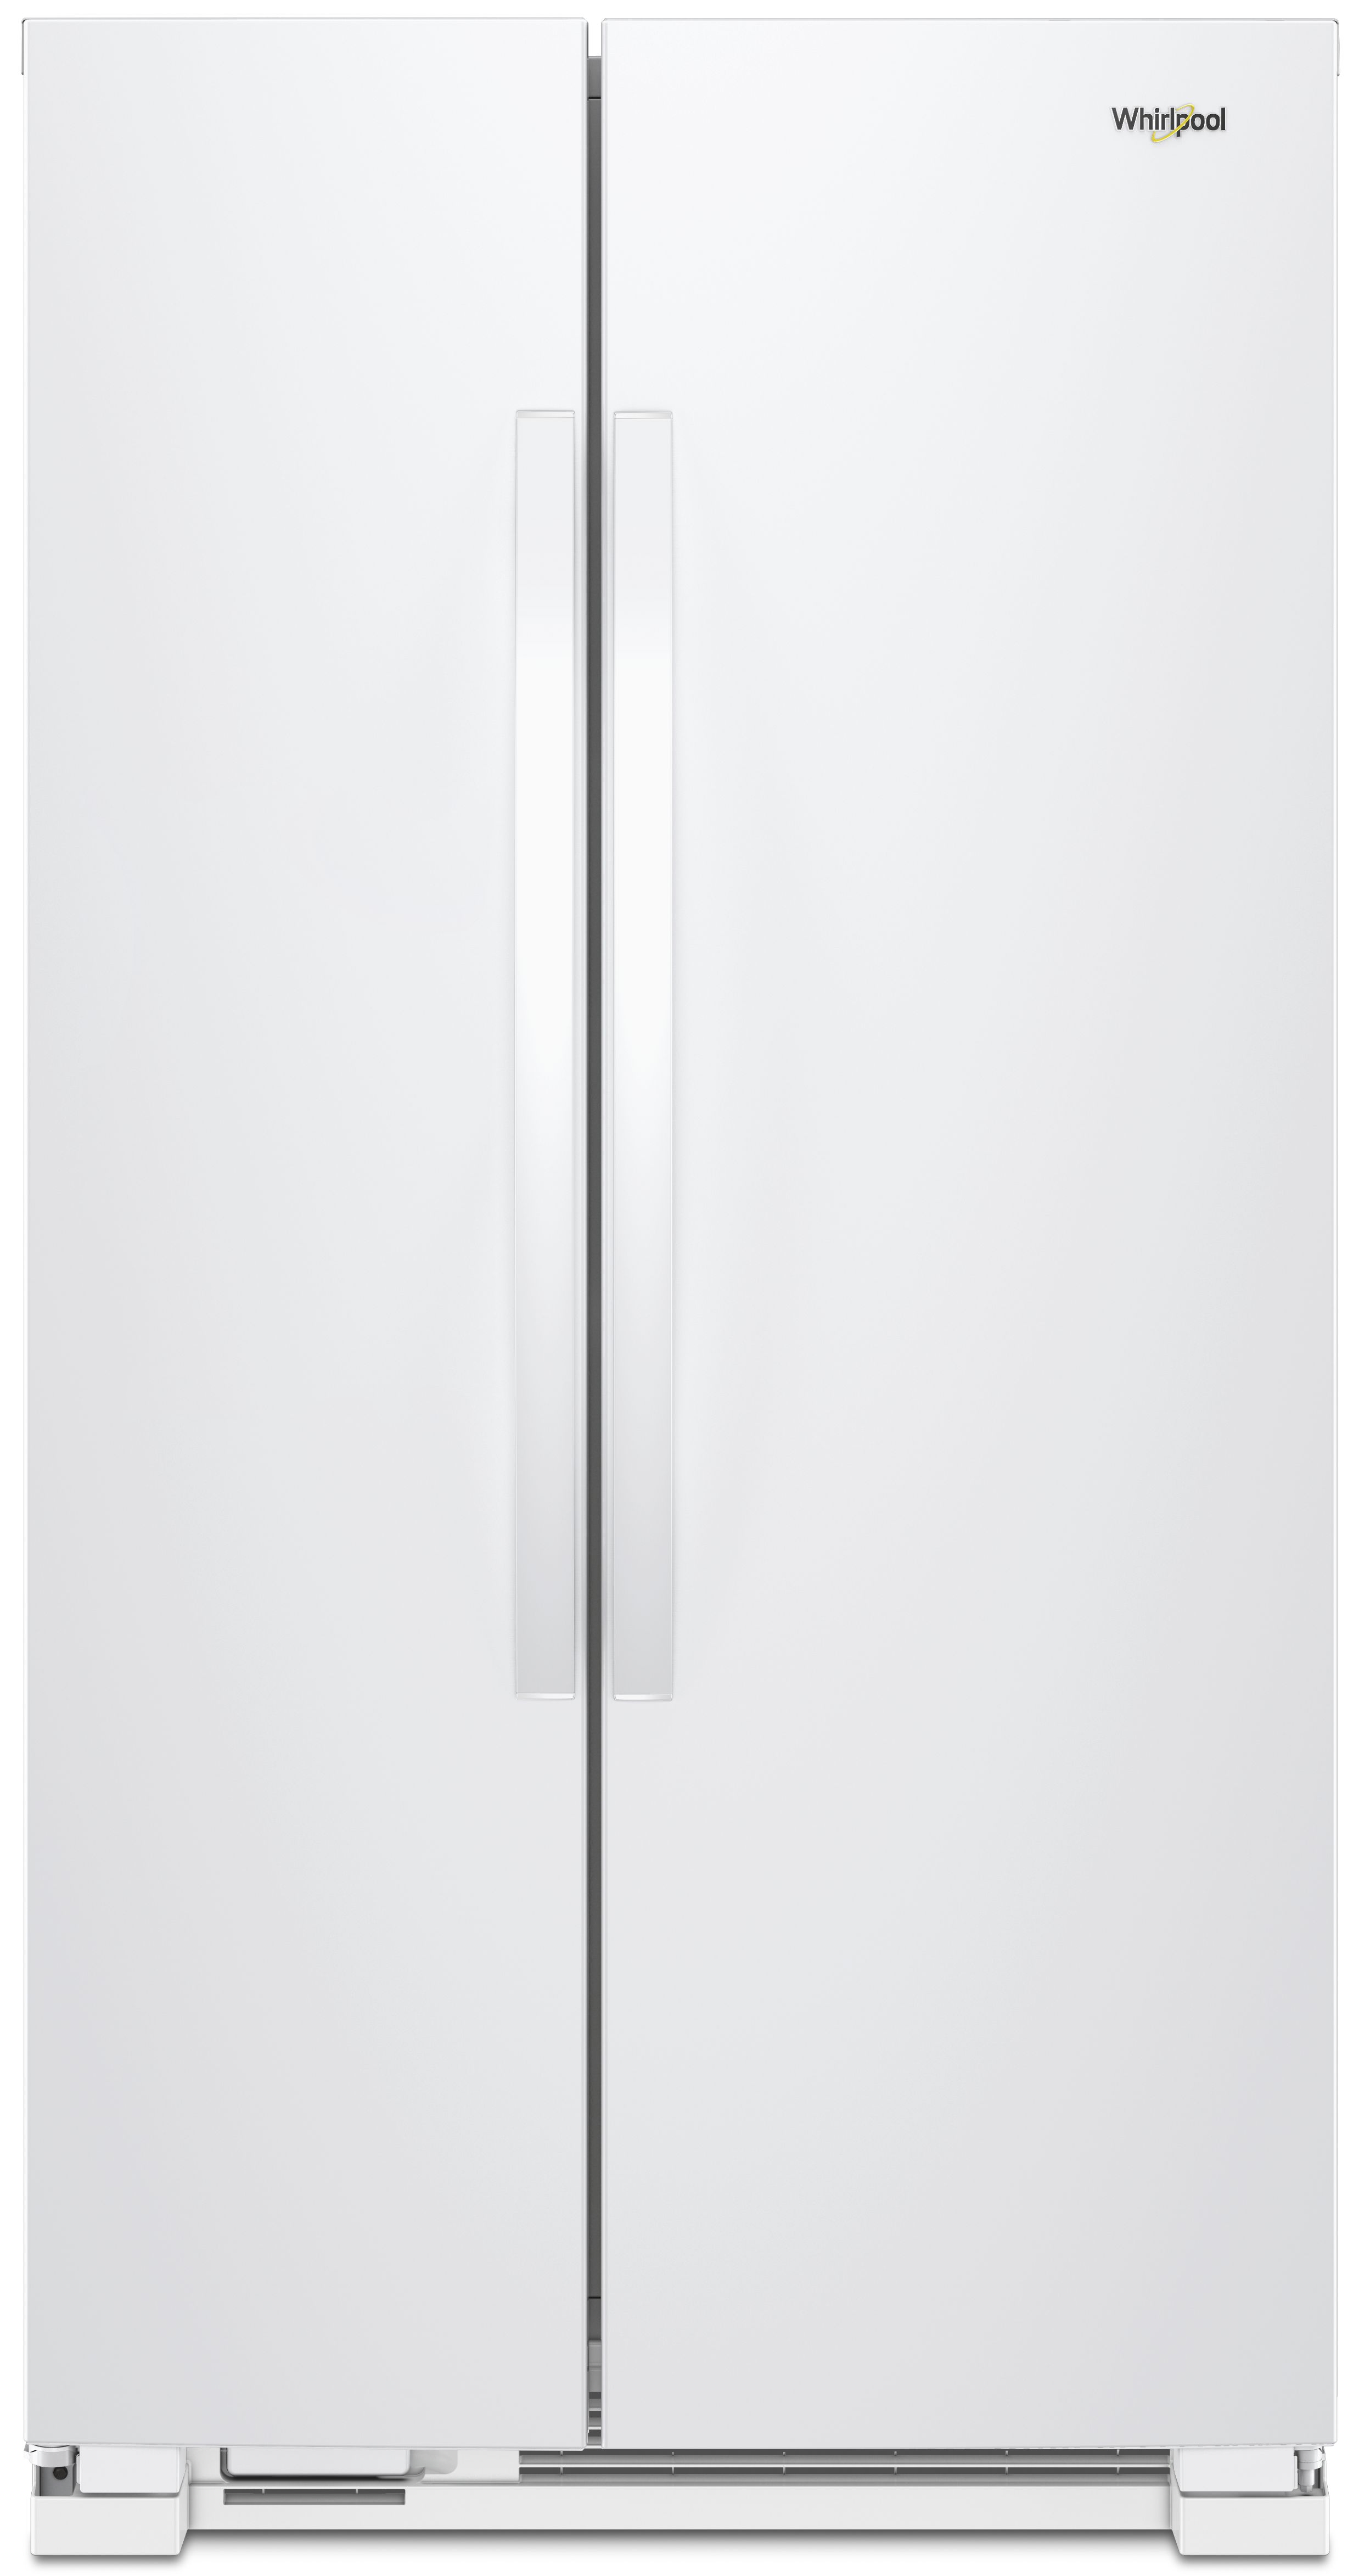 Whirlpool® 21.7 Cu. Ft. Side-By-Side Refrigerator-White-WRS312SNHW